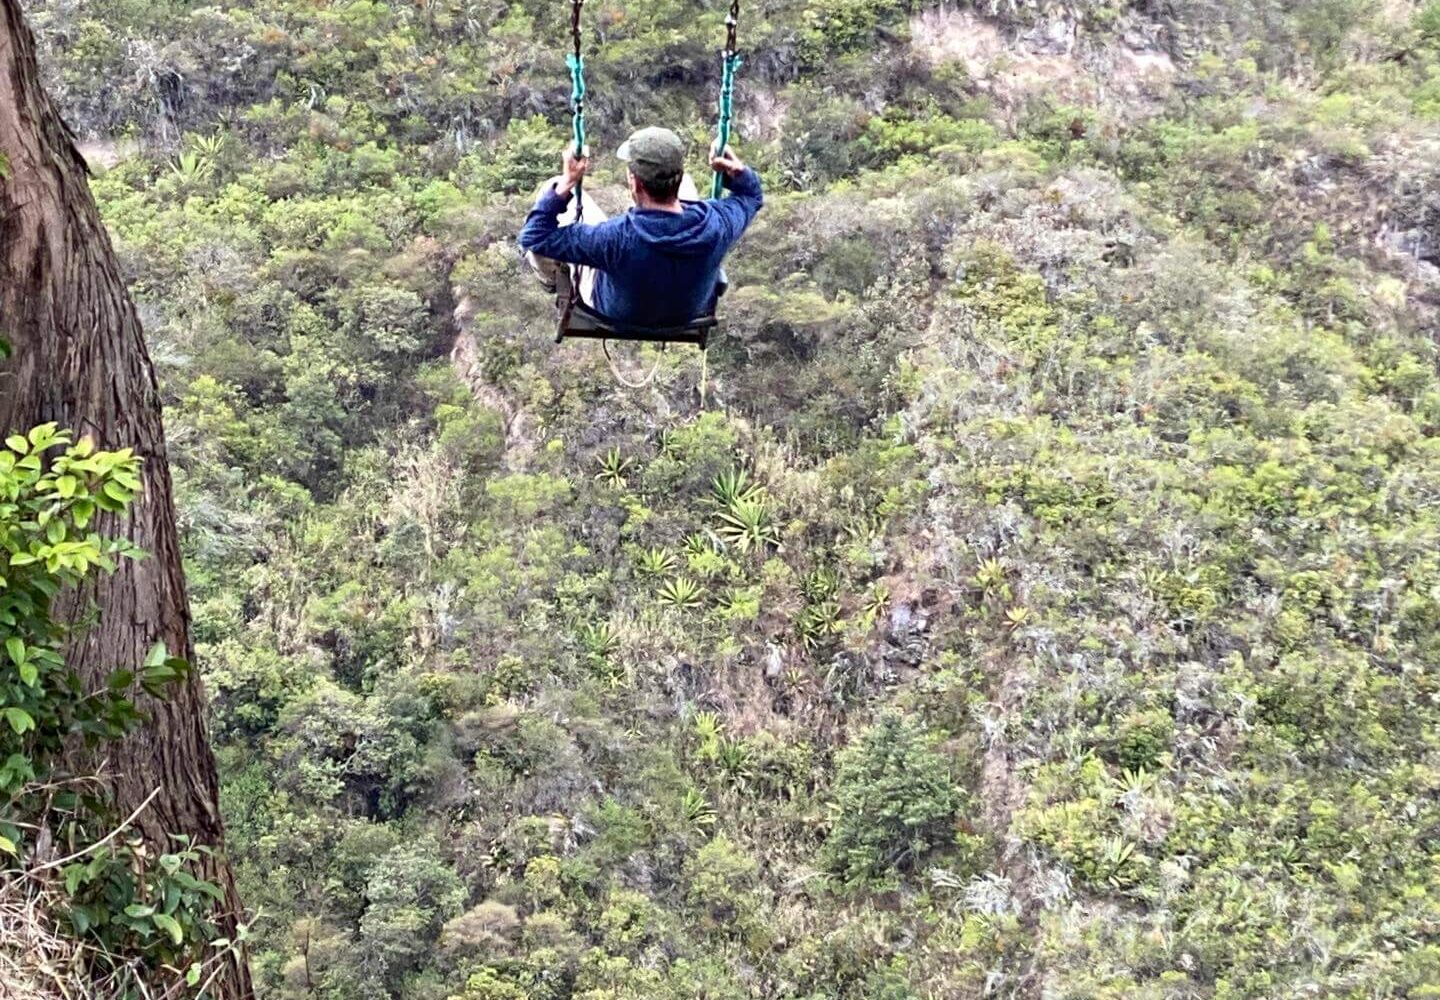 Guido (sort of) enjoying the rather spectacular swing next to the Andean Bear's viewpoint.